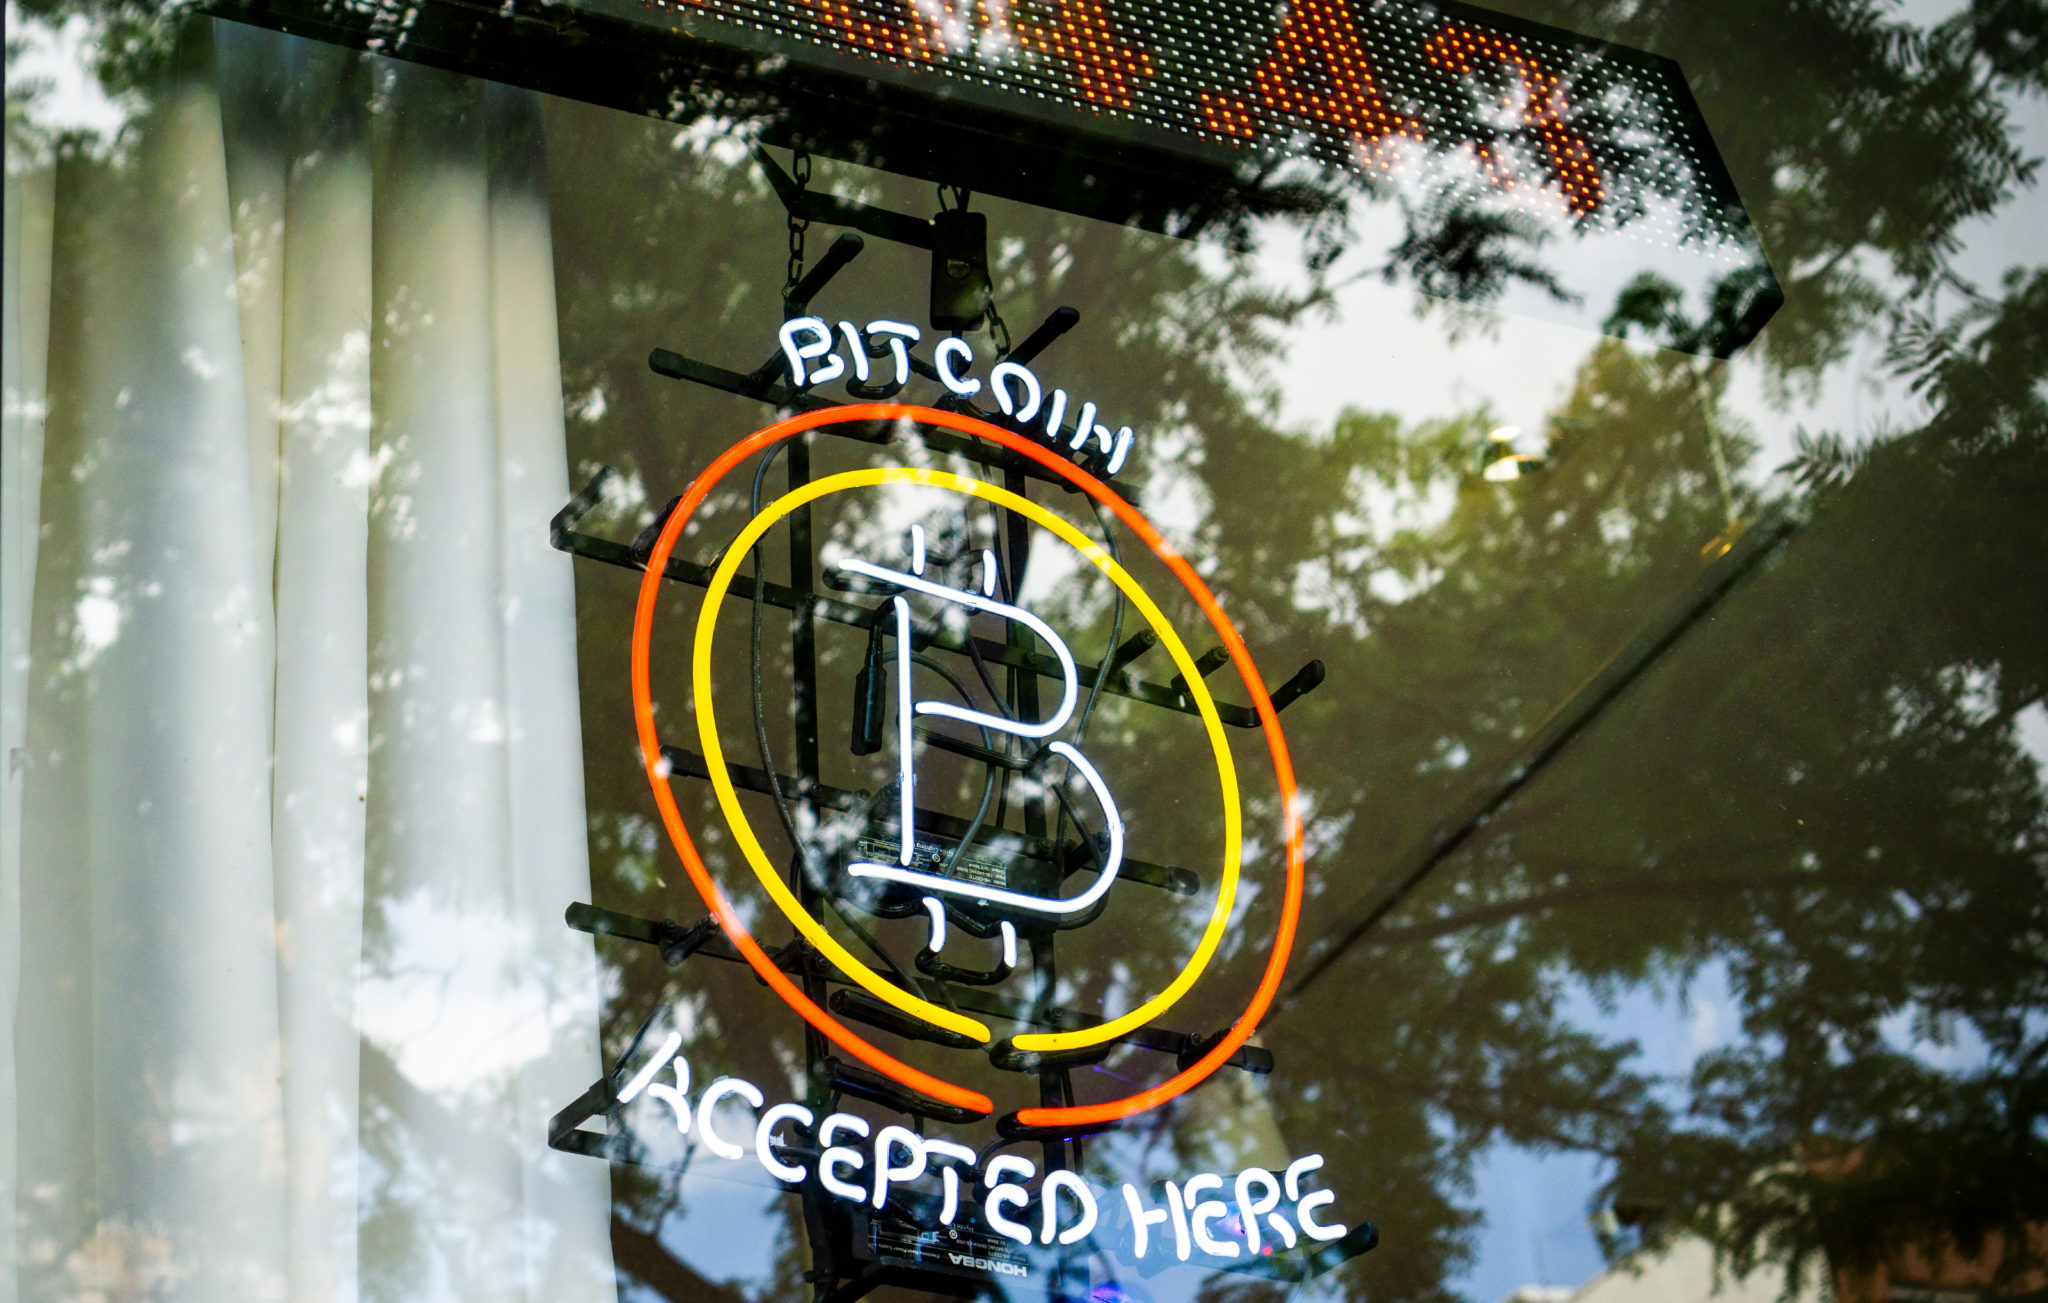 Bitcoin accepted here is displayed in the window of a store in the East Village in New York, 15-05-2021